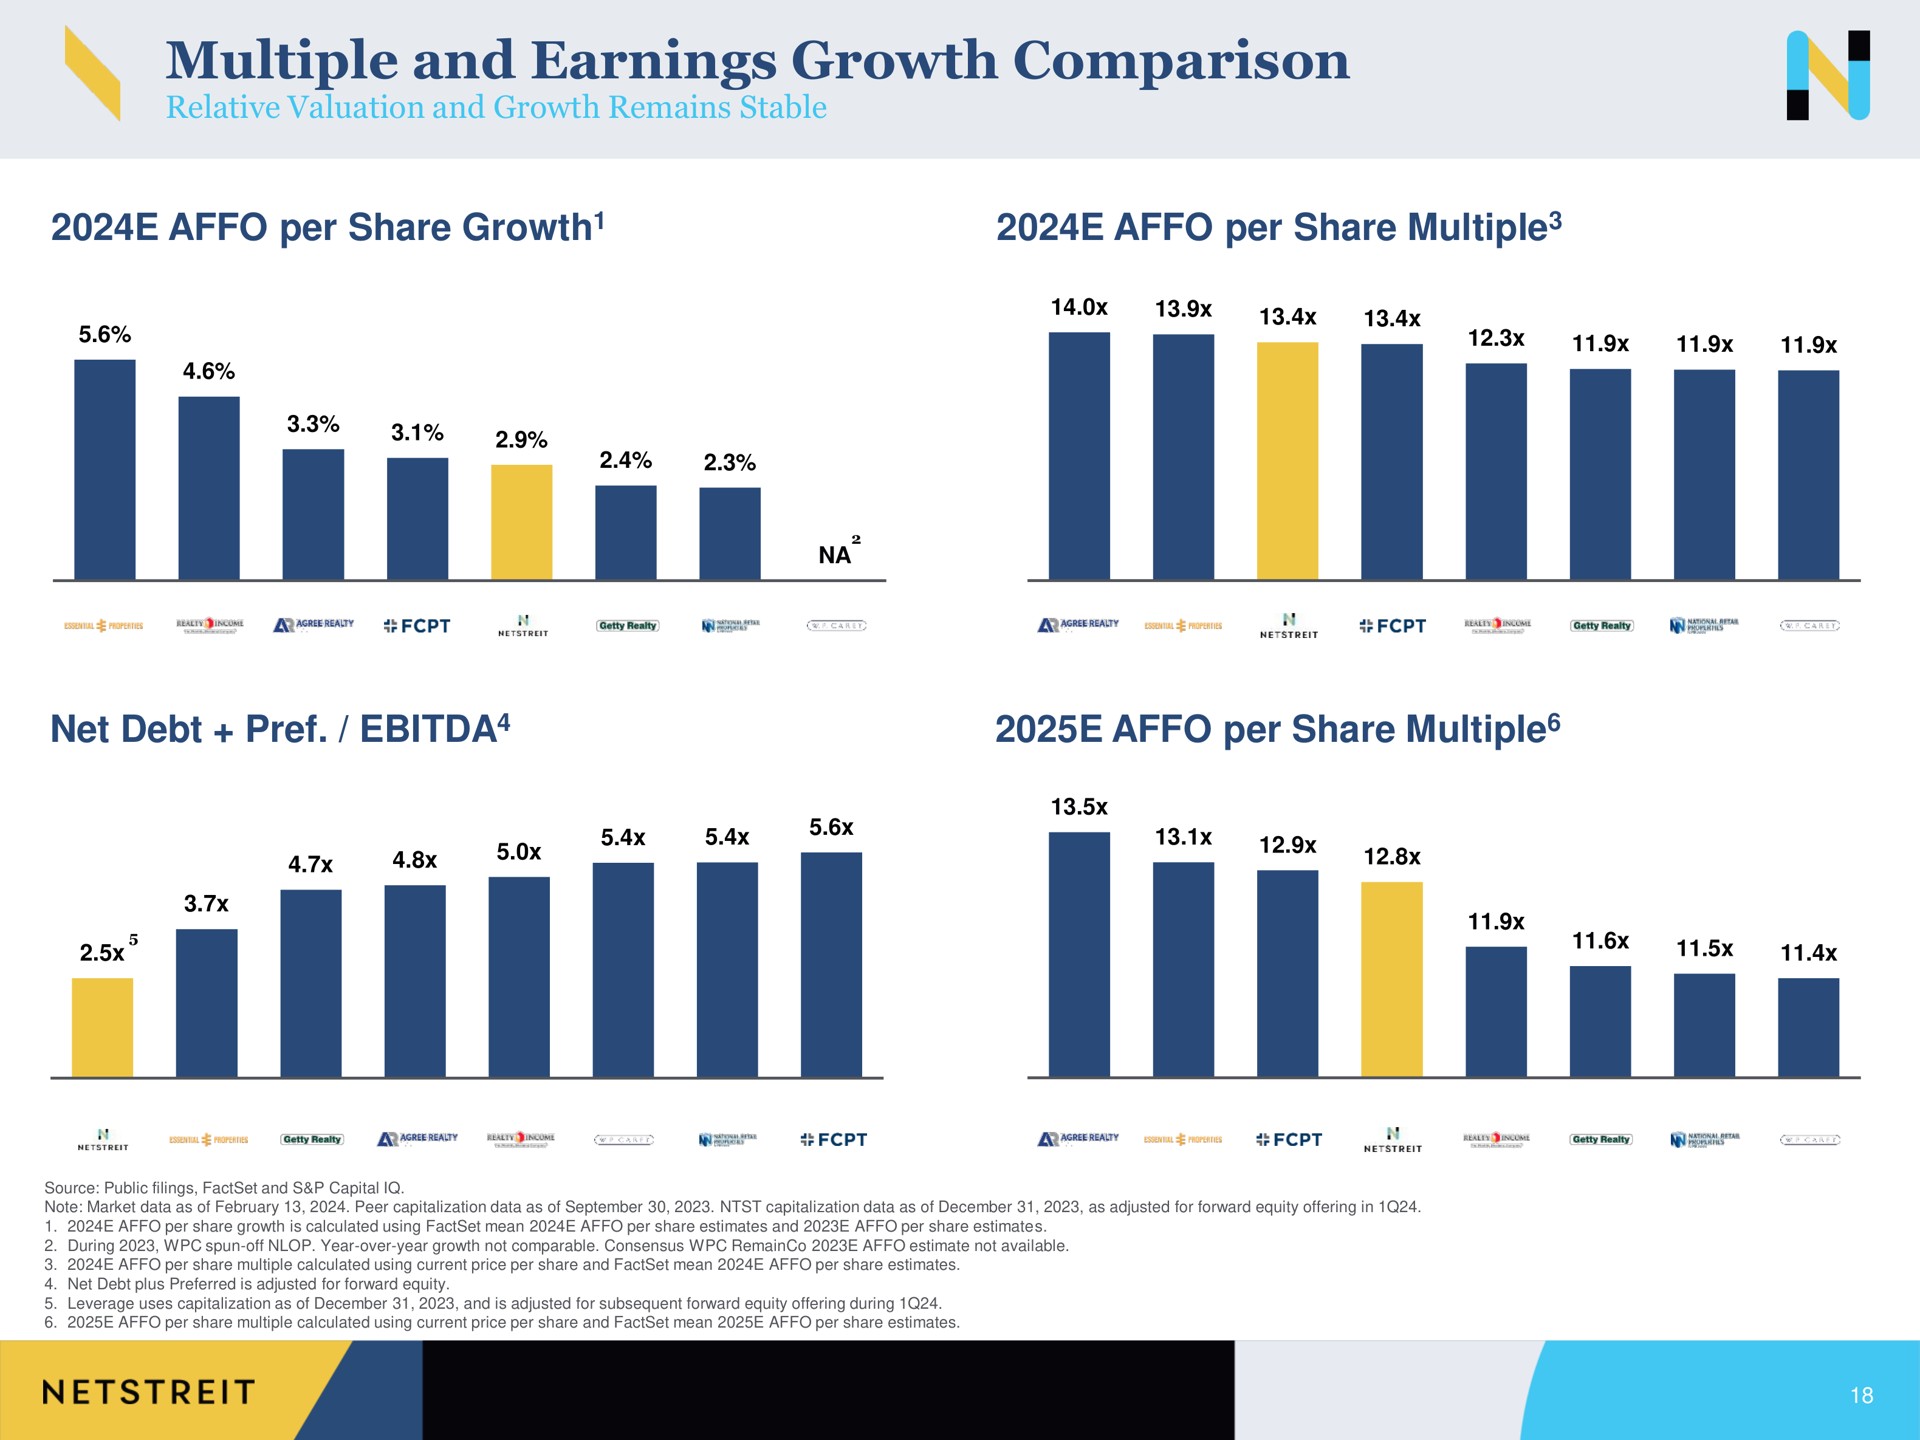 multiple and earnings growth comparison per share growth per share multiple net debt per share multiple | Netstreit